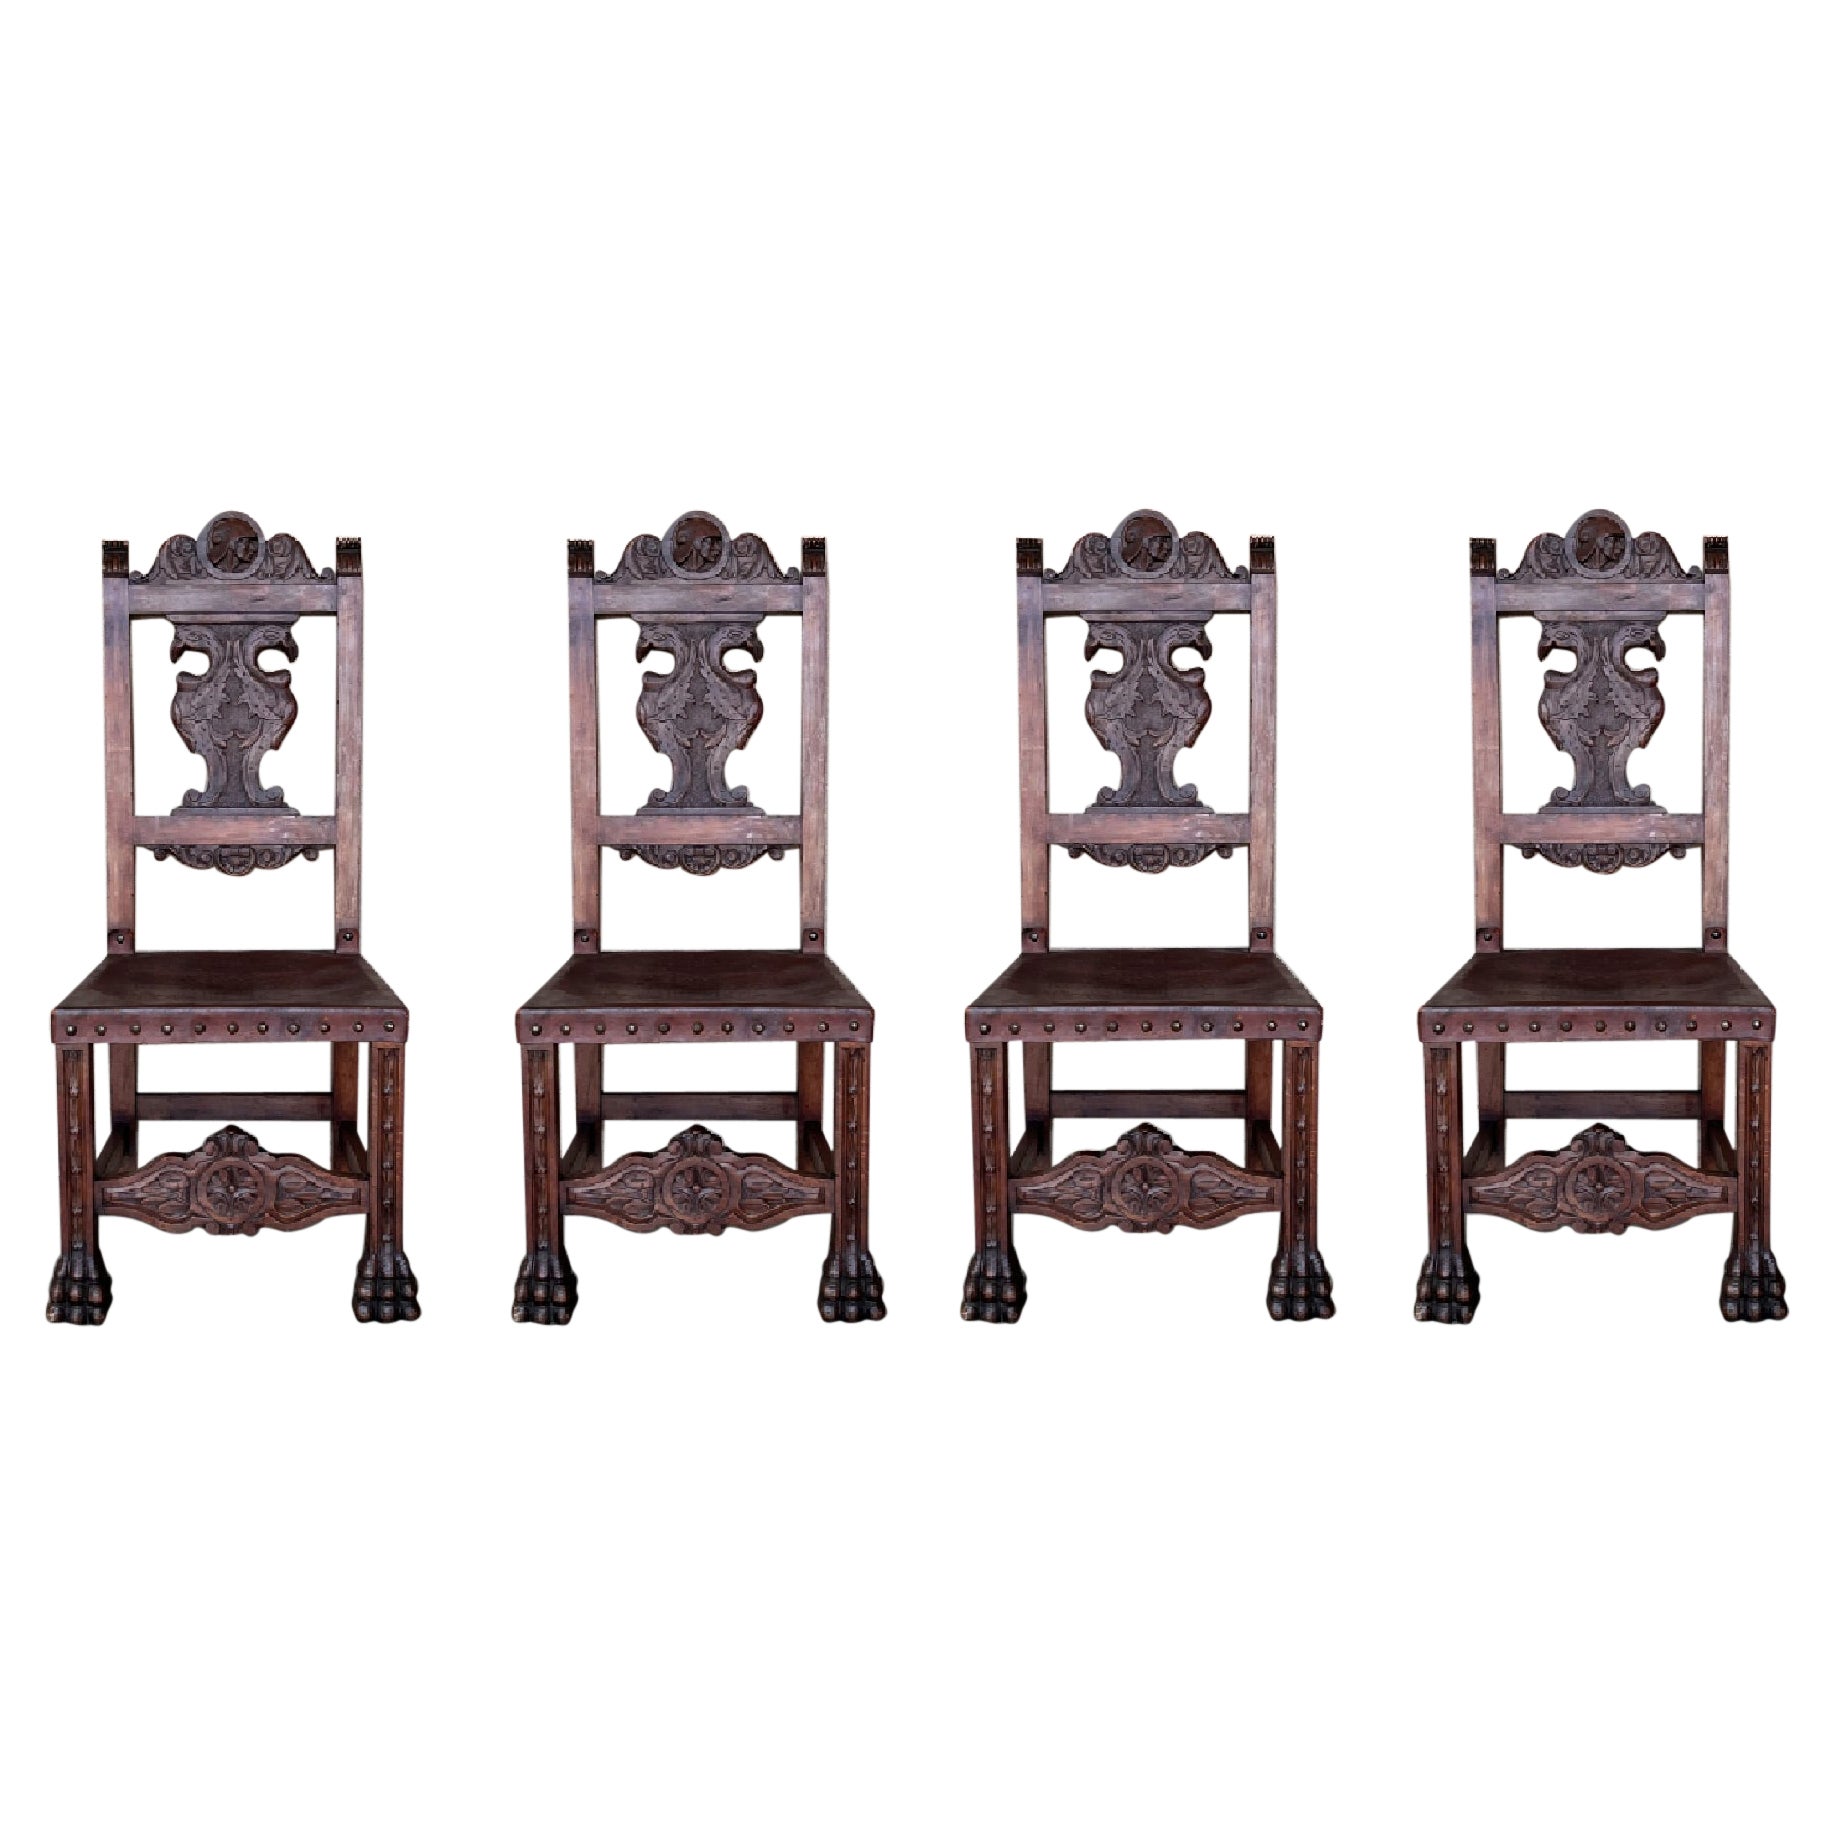 19th Century Set of Four French Carved Walnut Turned Wood Chairs with Claw Feet For Sale